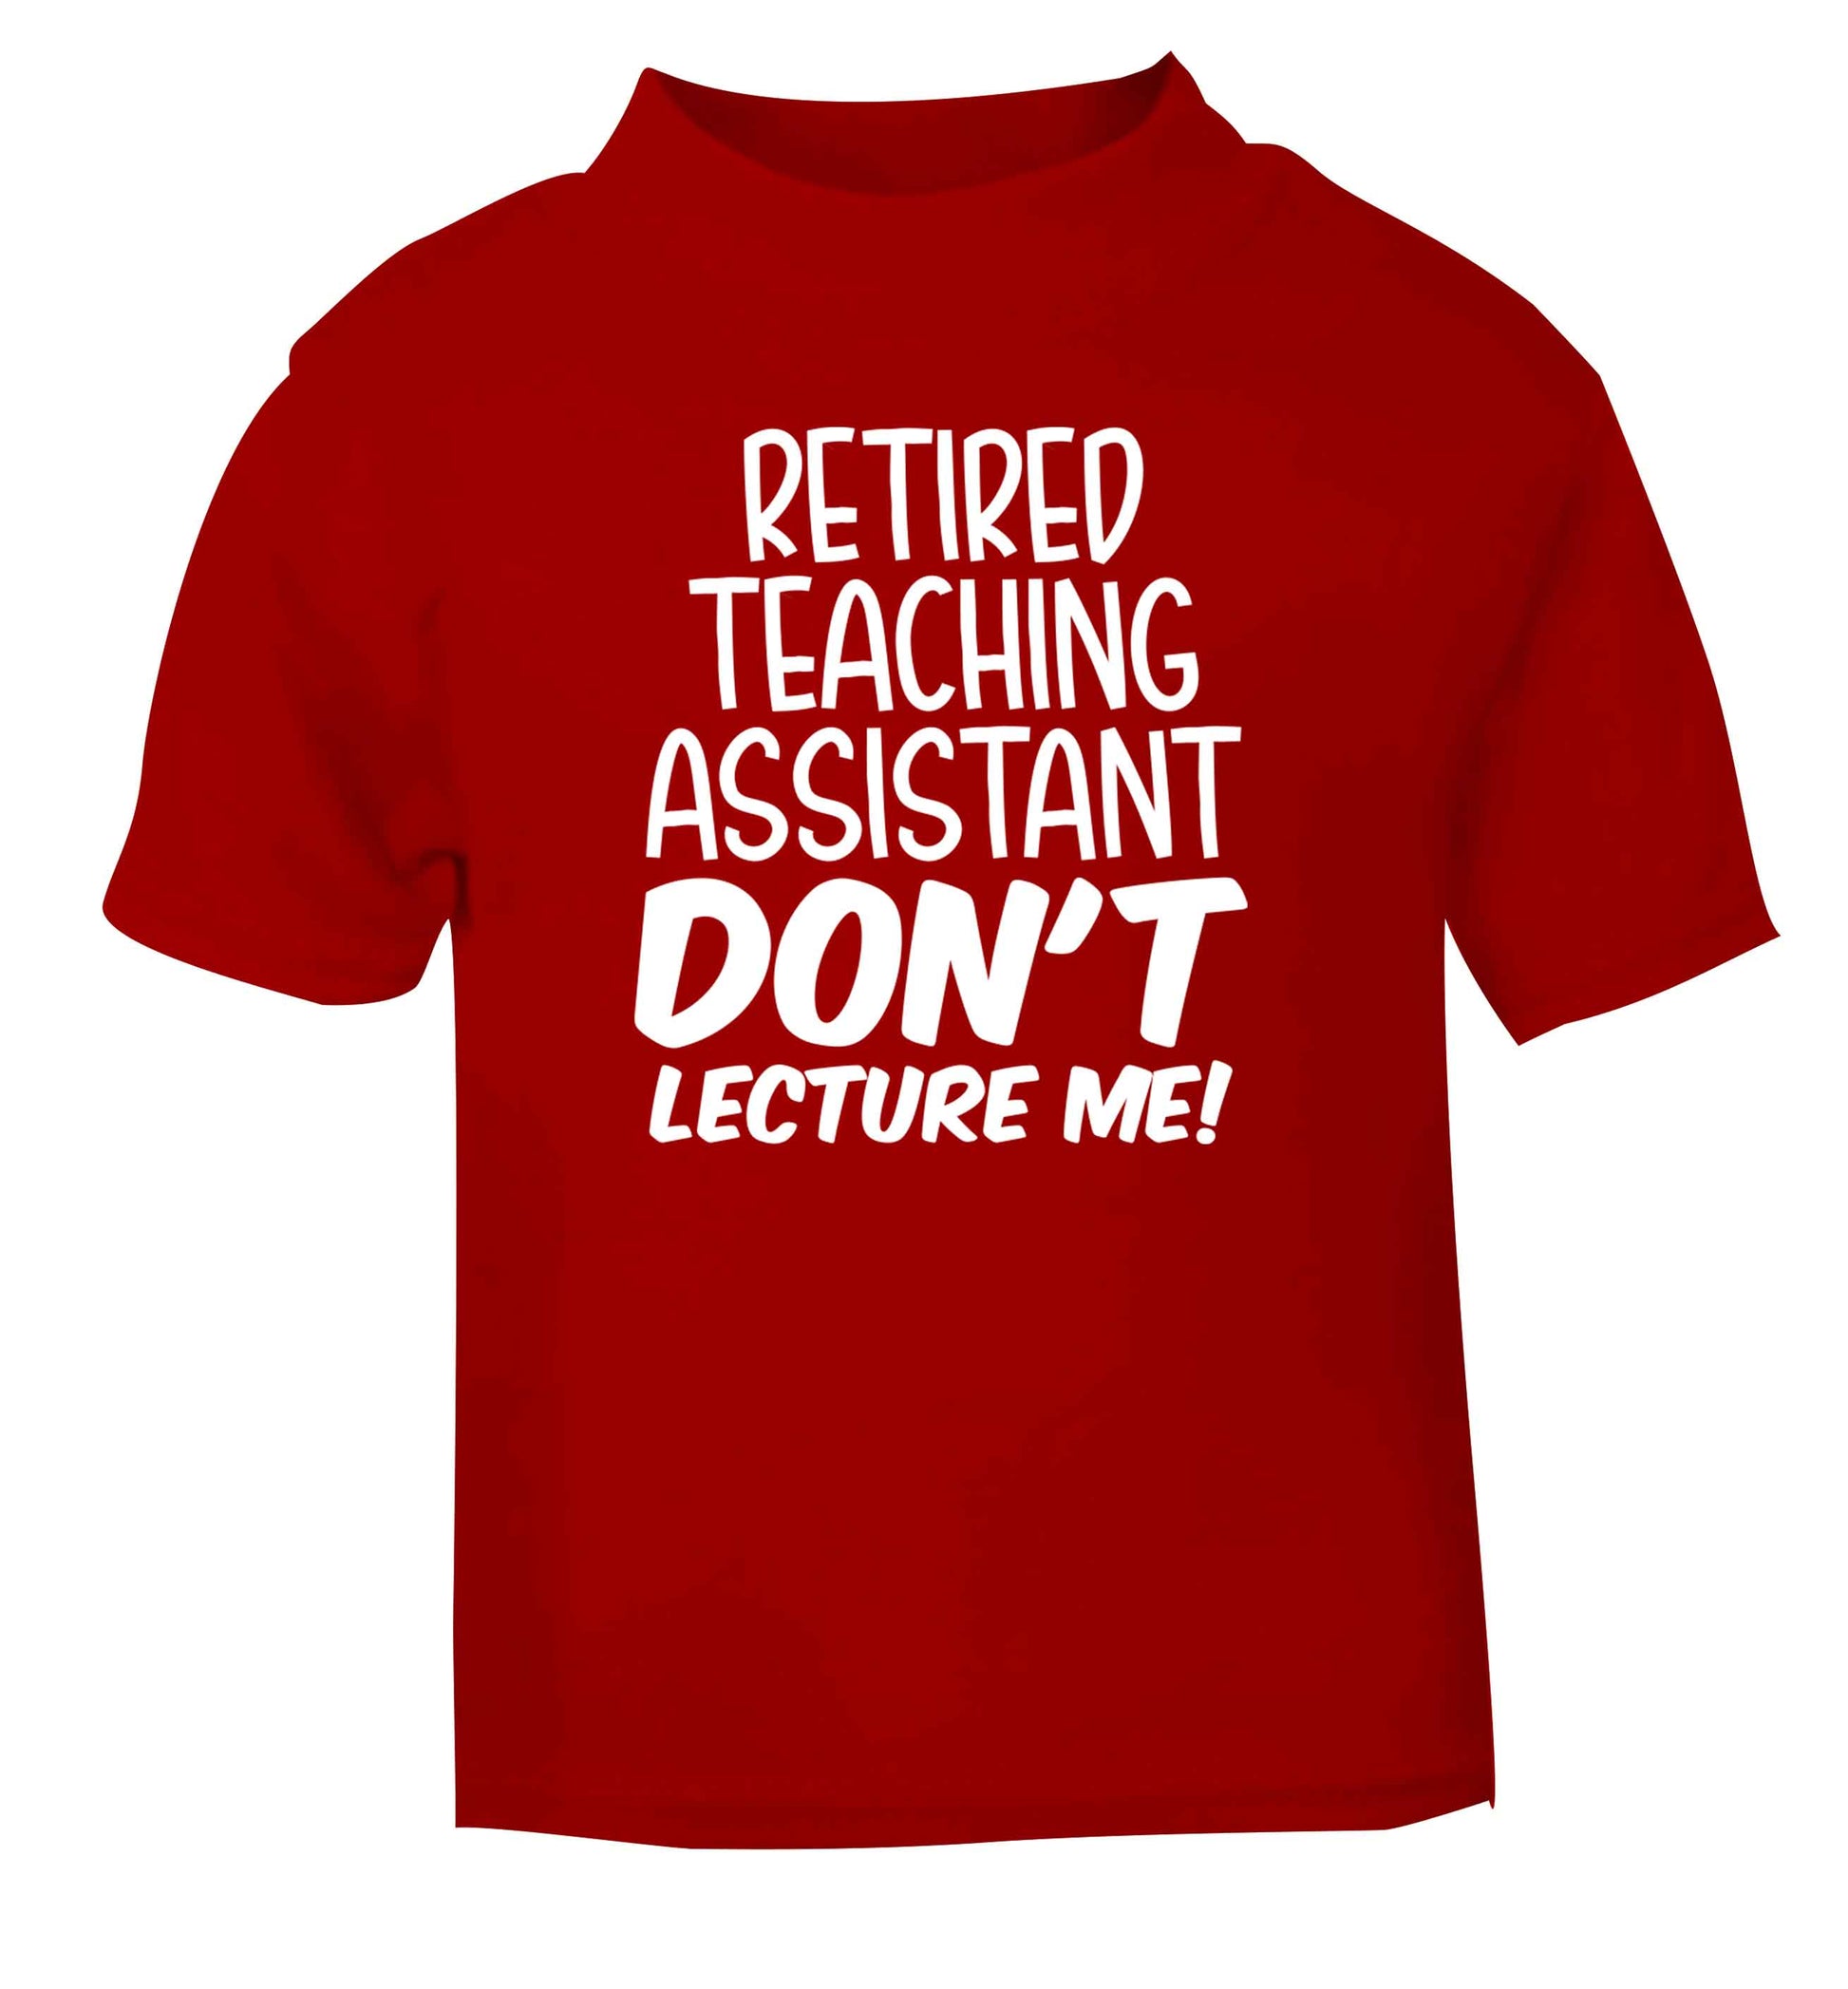 Retired teaching assistant don't lecture me red Baby Toddler Tshirt 2 Years